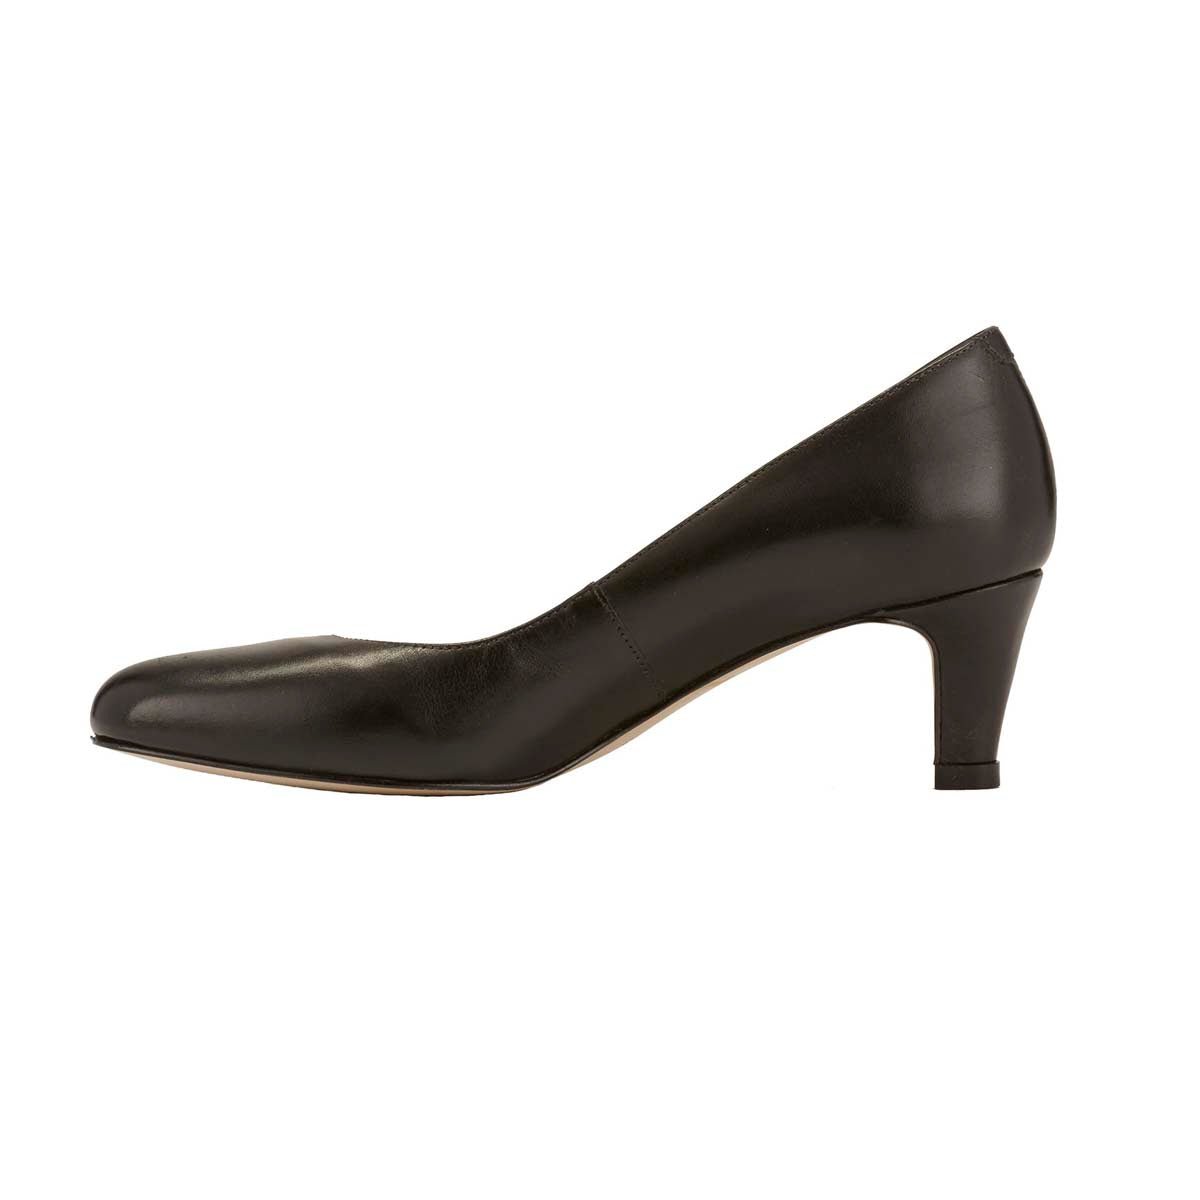 ROS HOMMERSON JOY II WOMEN DRESS PUMP SHOES IN BLACK LEATHER - TLW Shoes